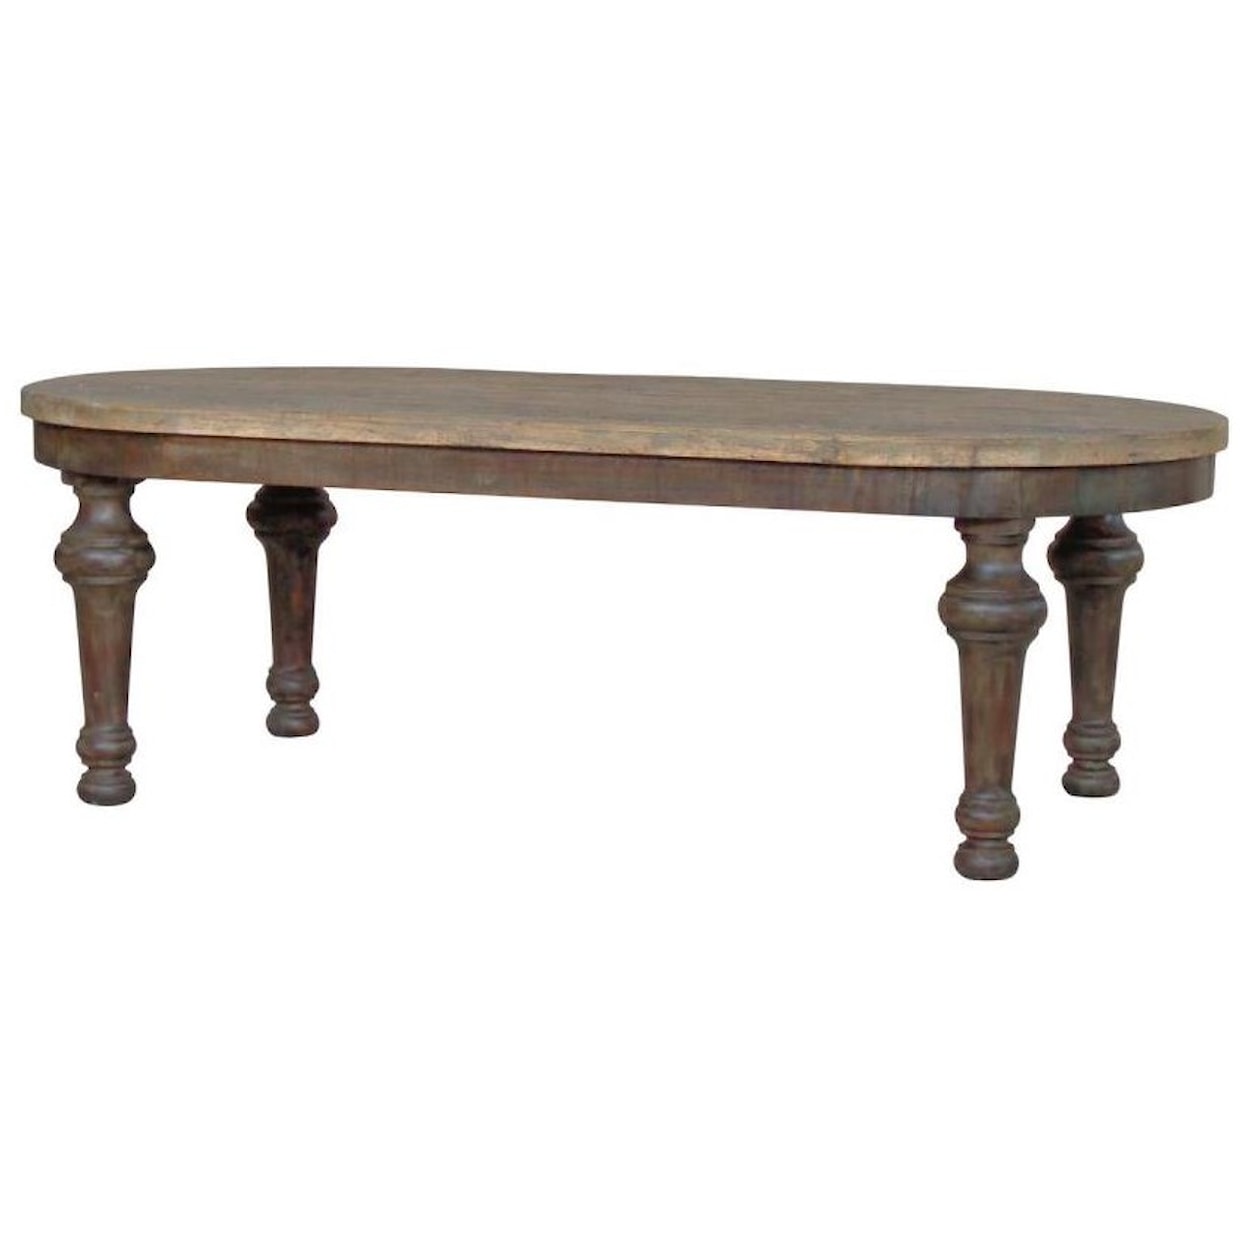 Furniture Source International Dining Oval Table